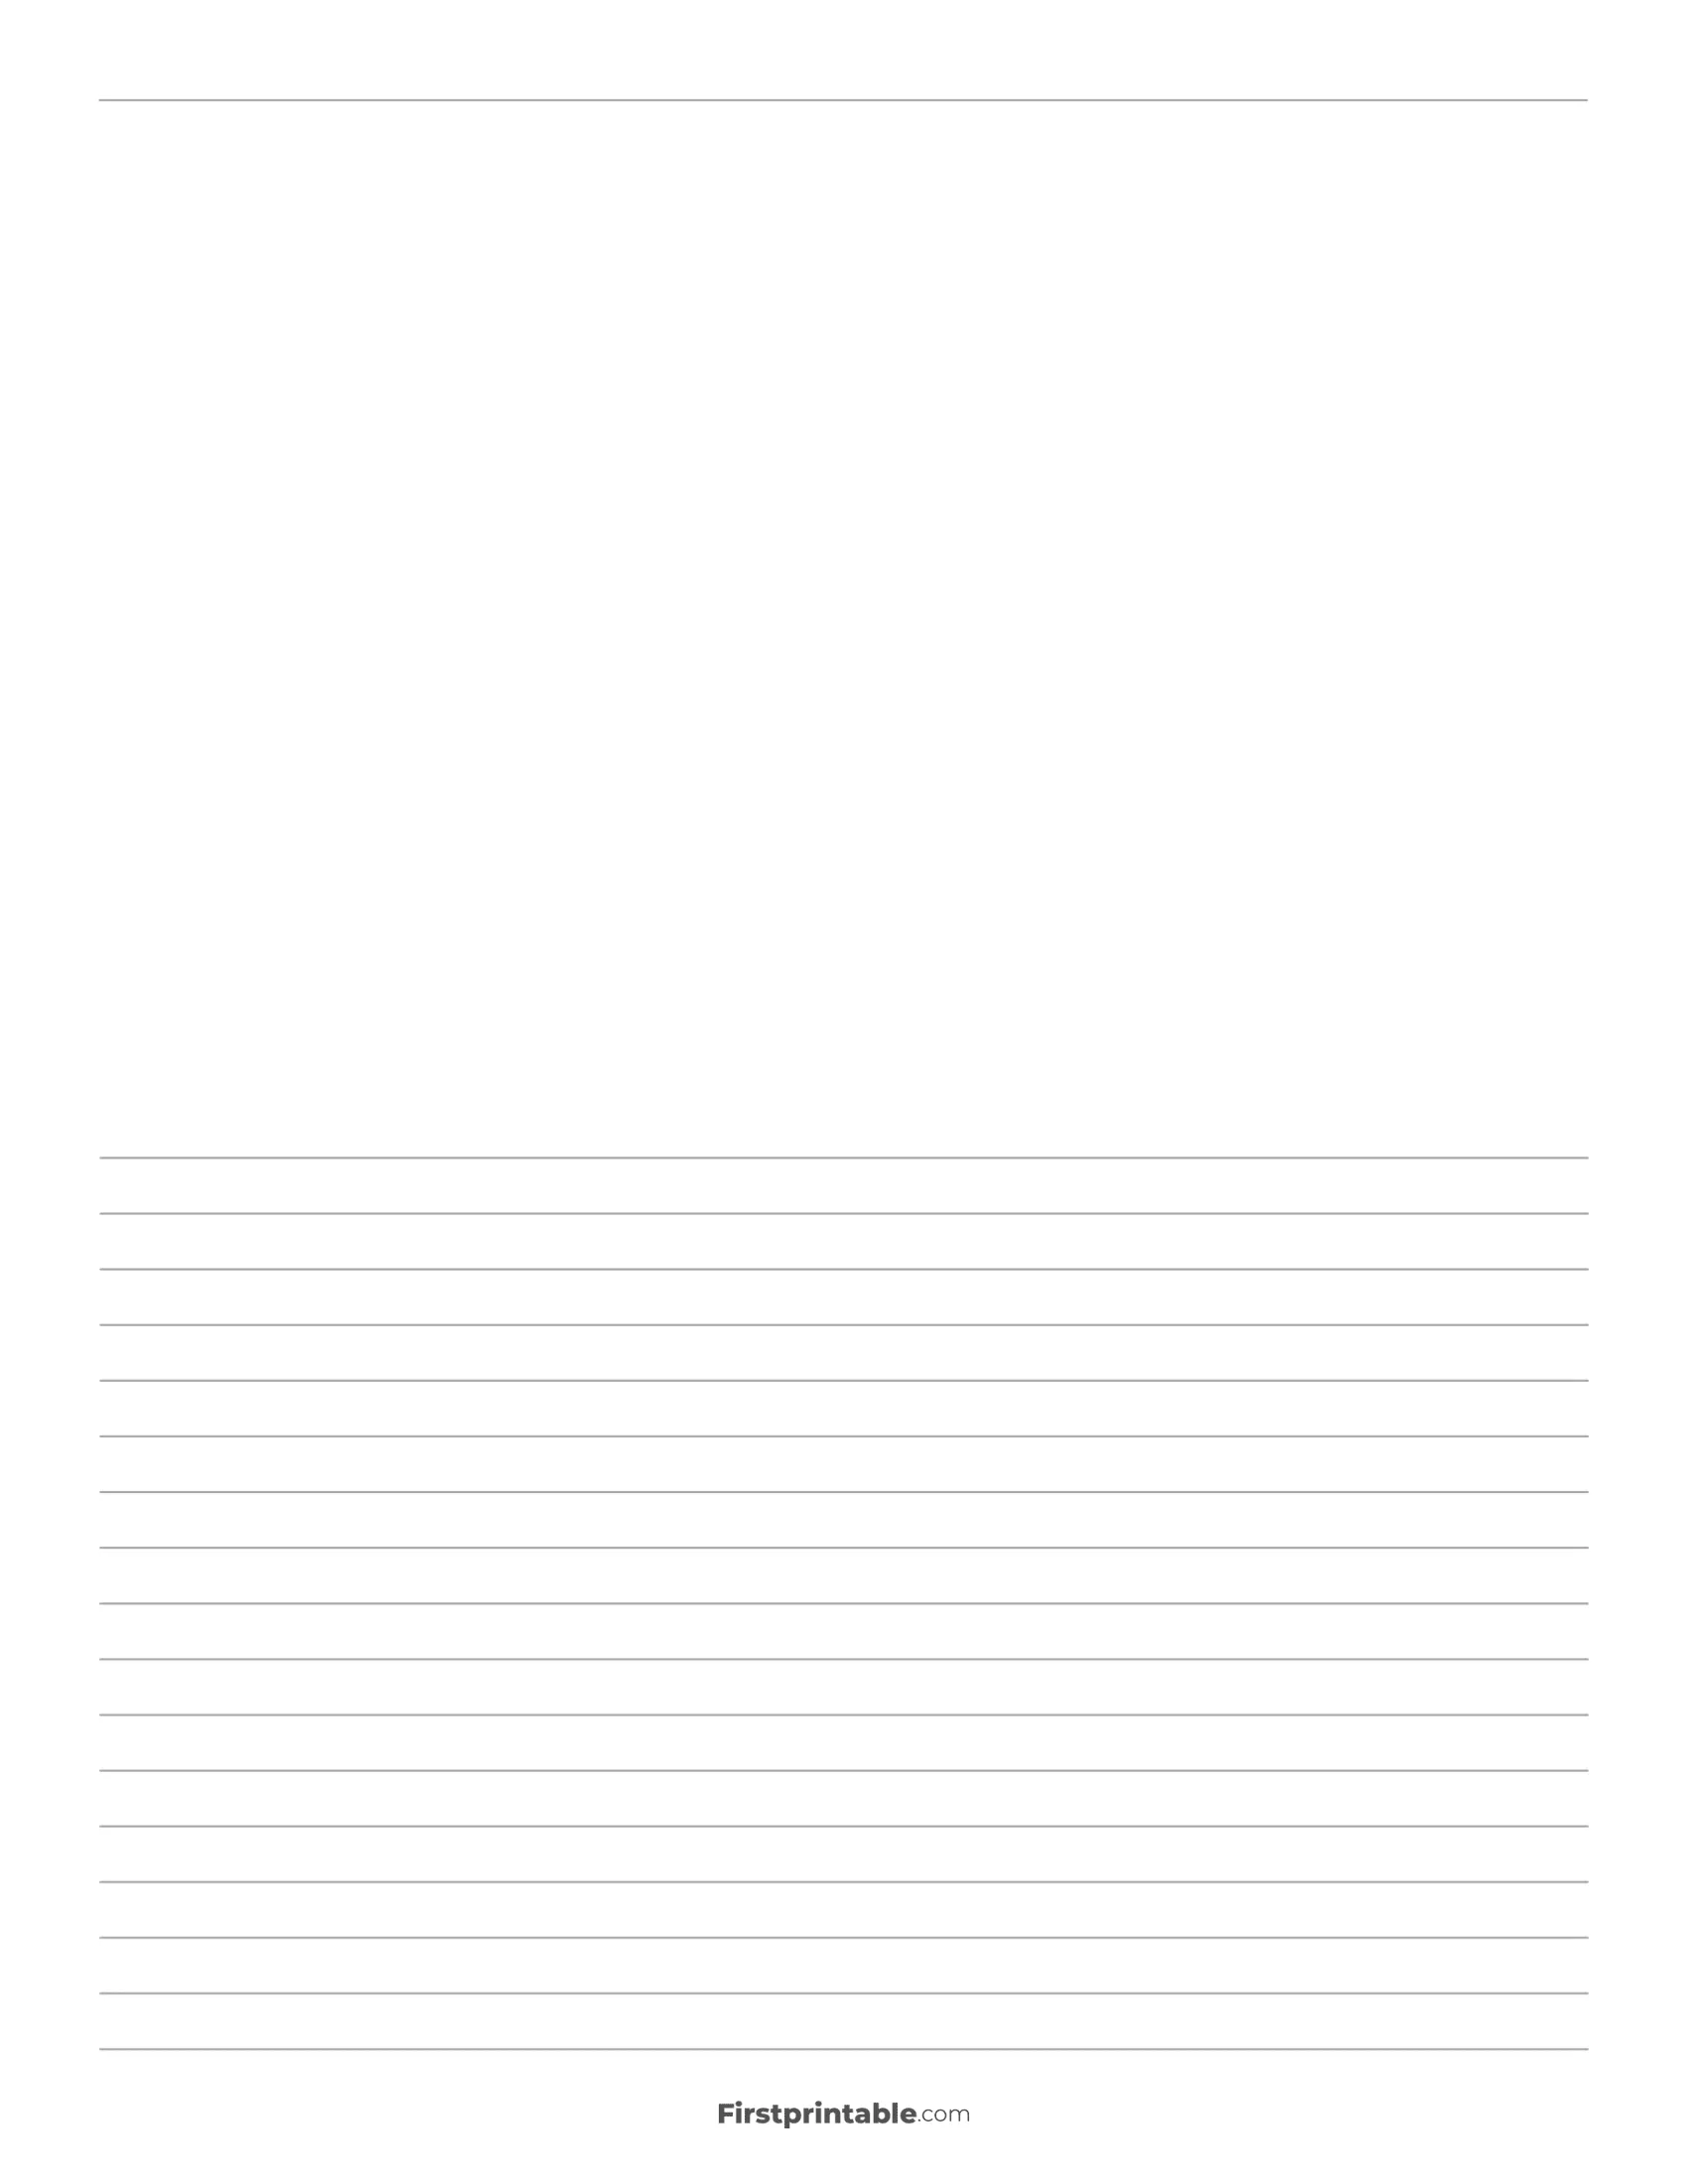 Printable Lined Paper - Bottom